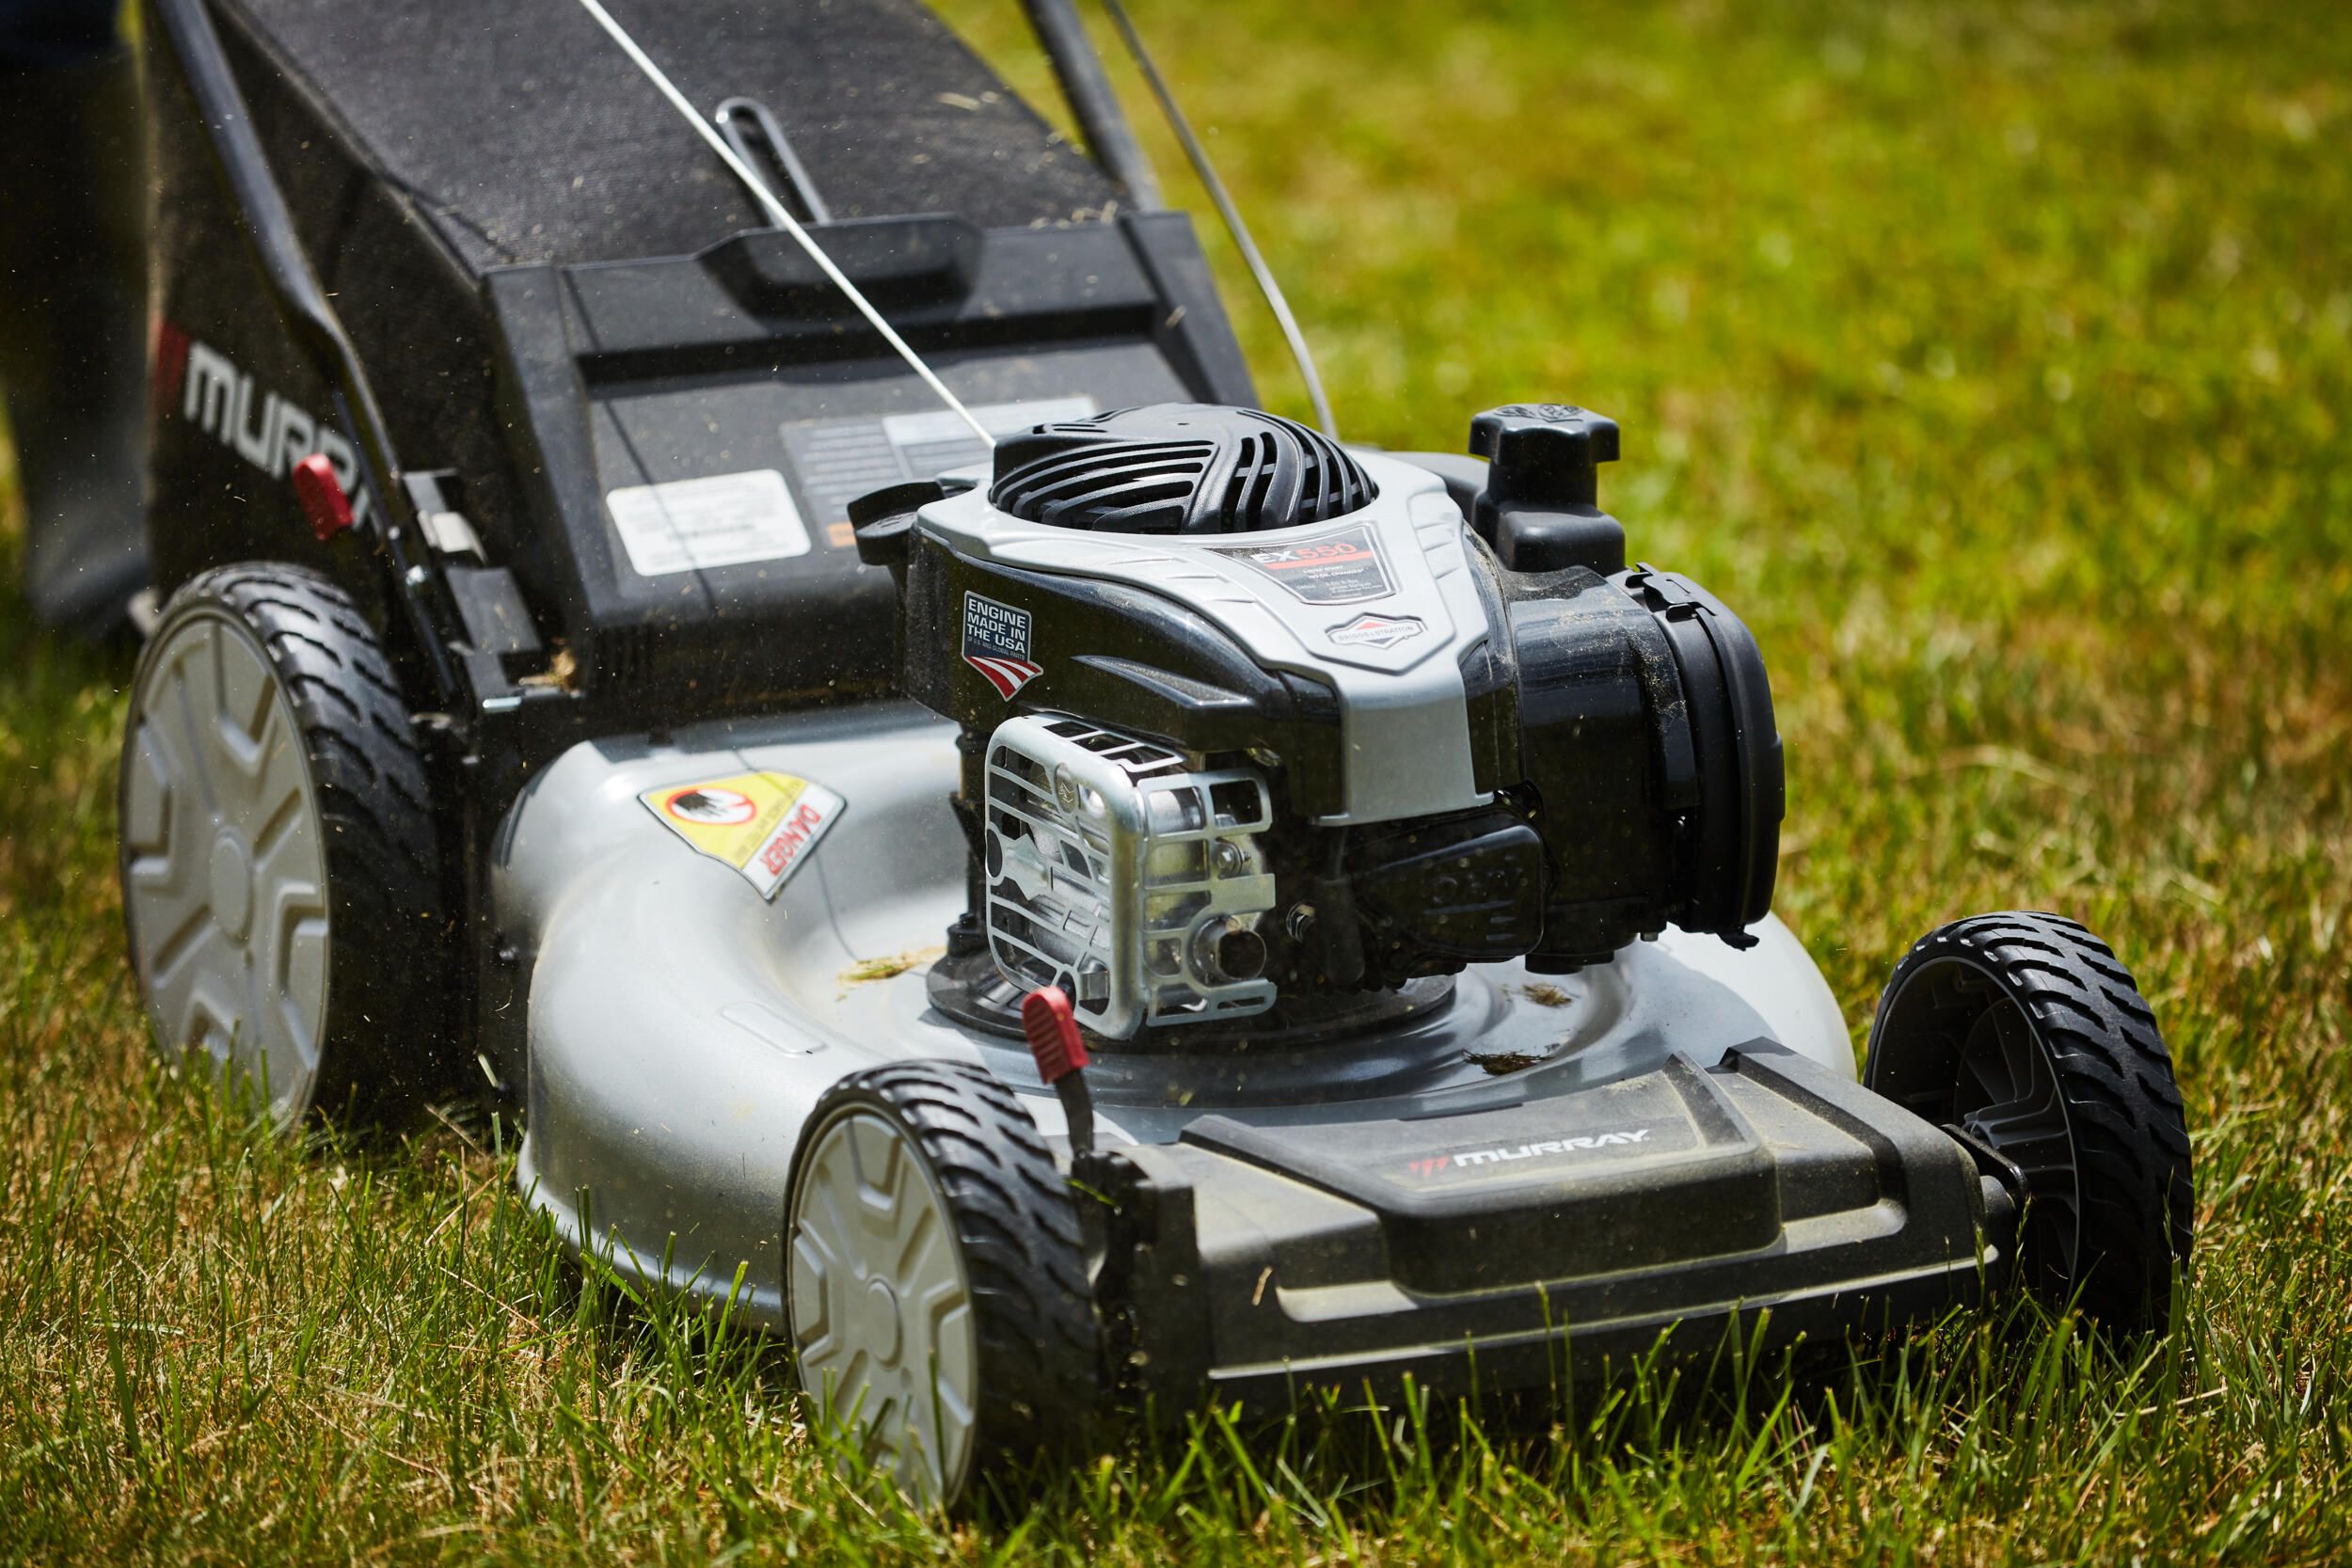 Best Push Mowers For Your Yard - The Home Depot